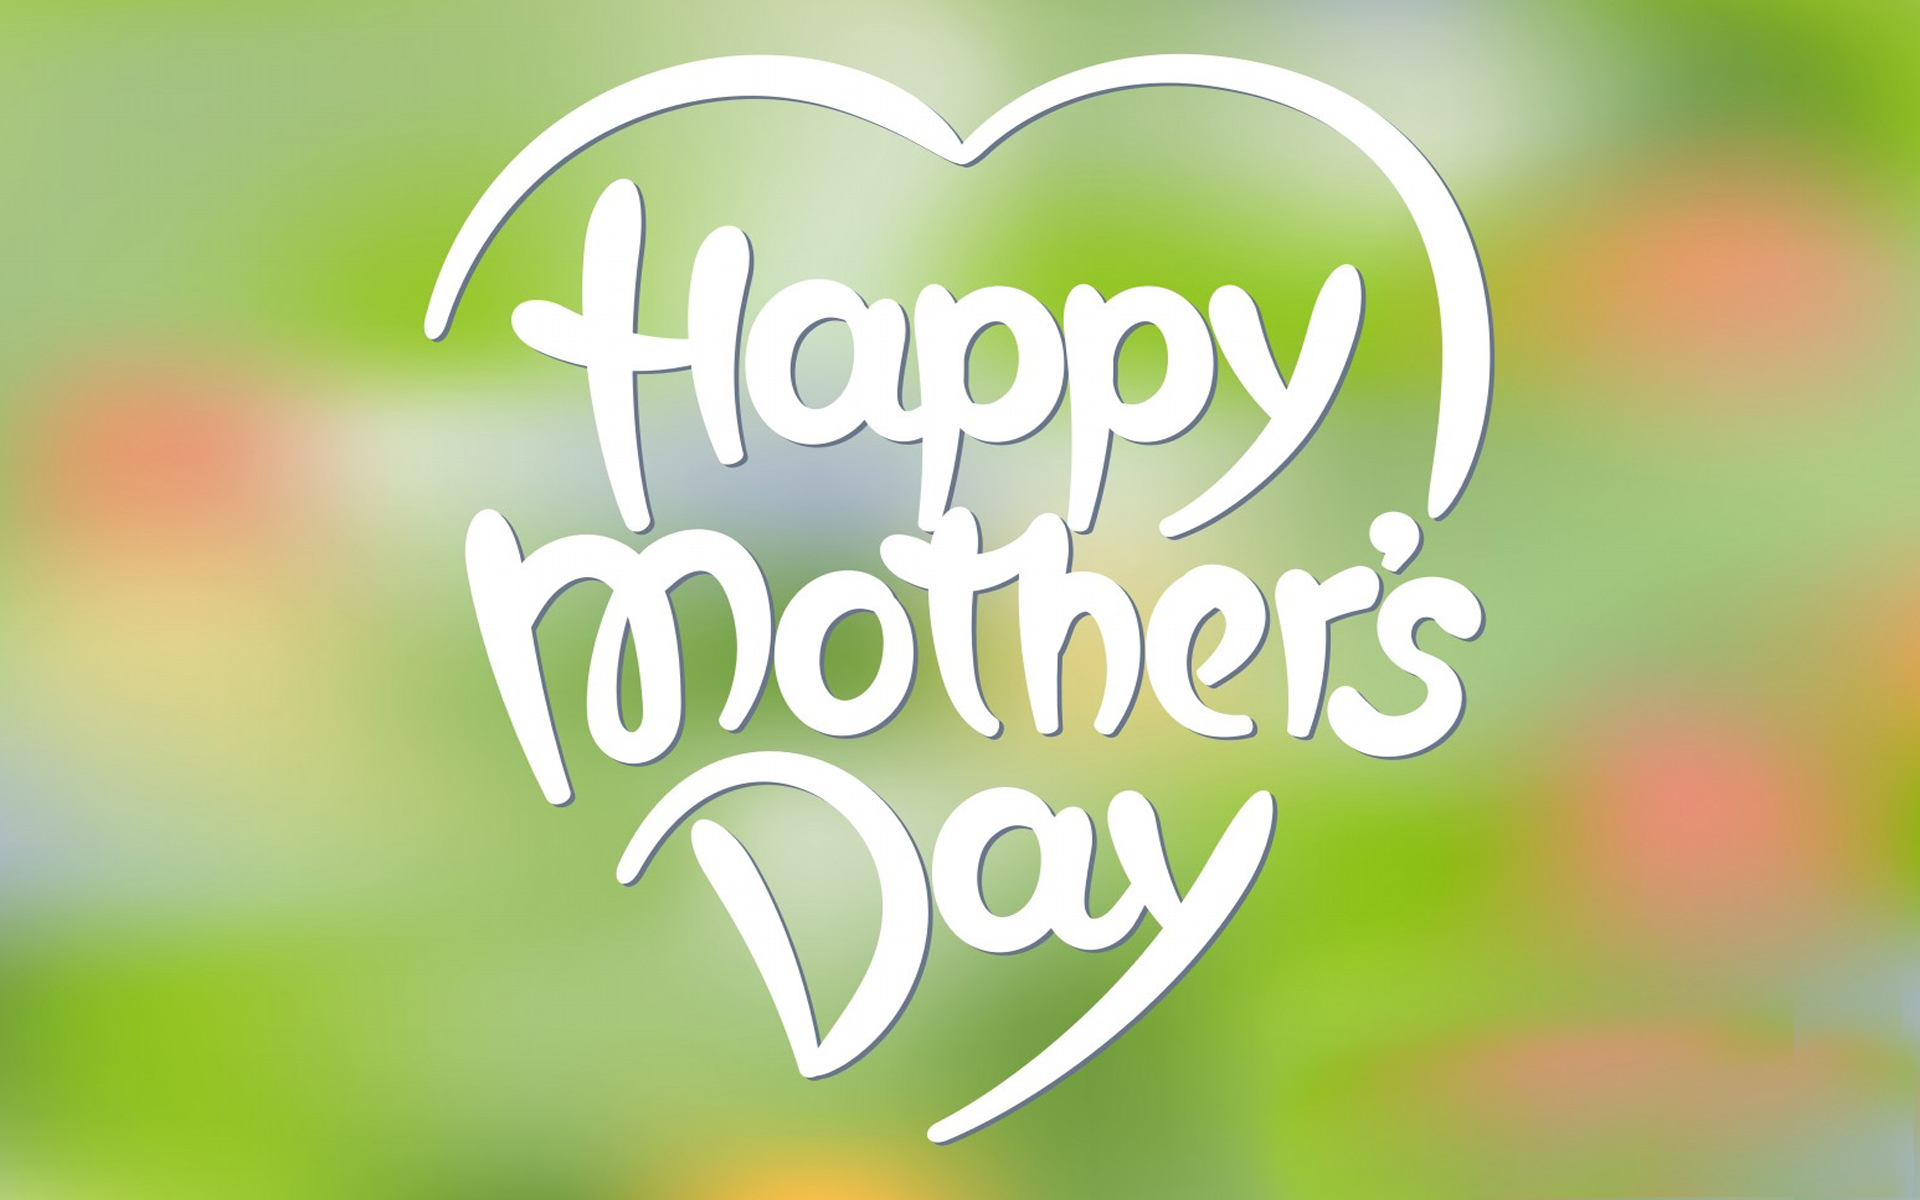 happy mothers day hd wallpaper,green,font,text,logo,graphics